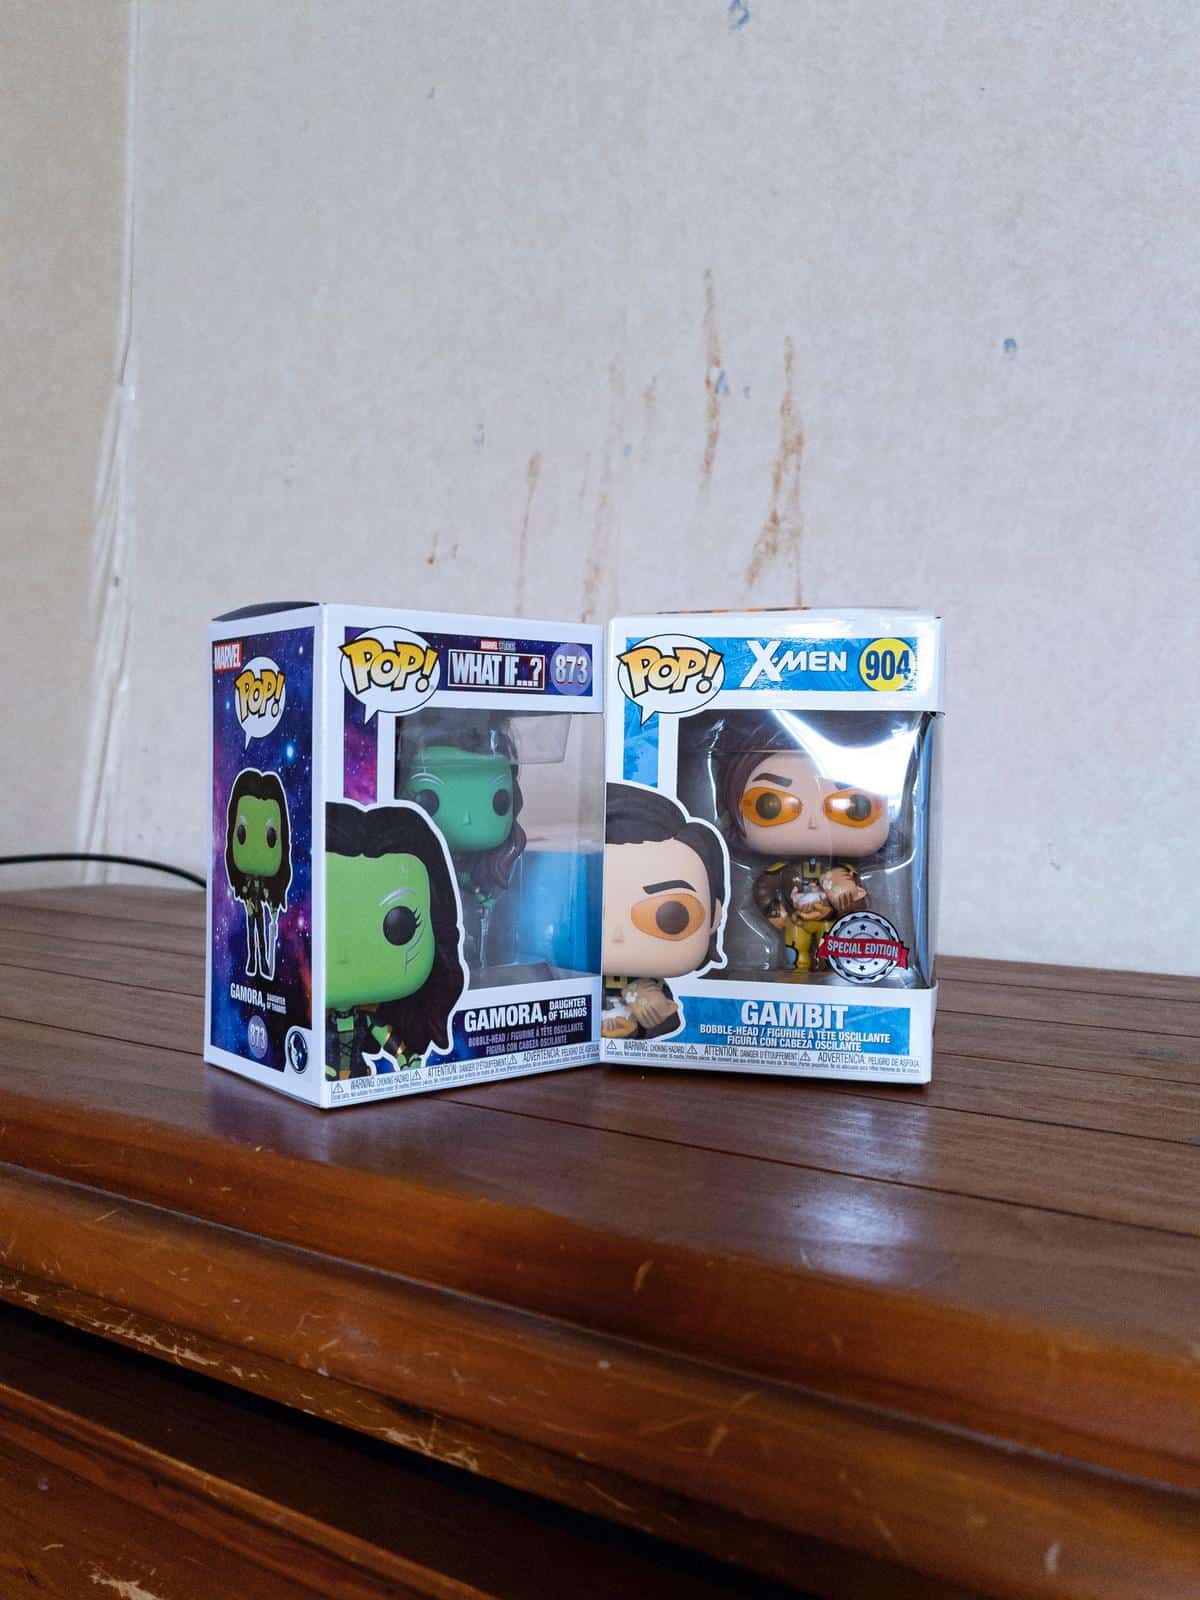 An image of various Funko Pop figures representing different characters and franchises.